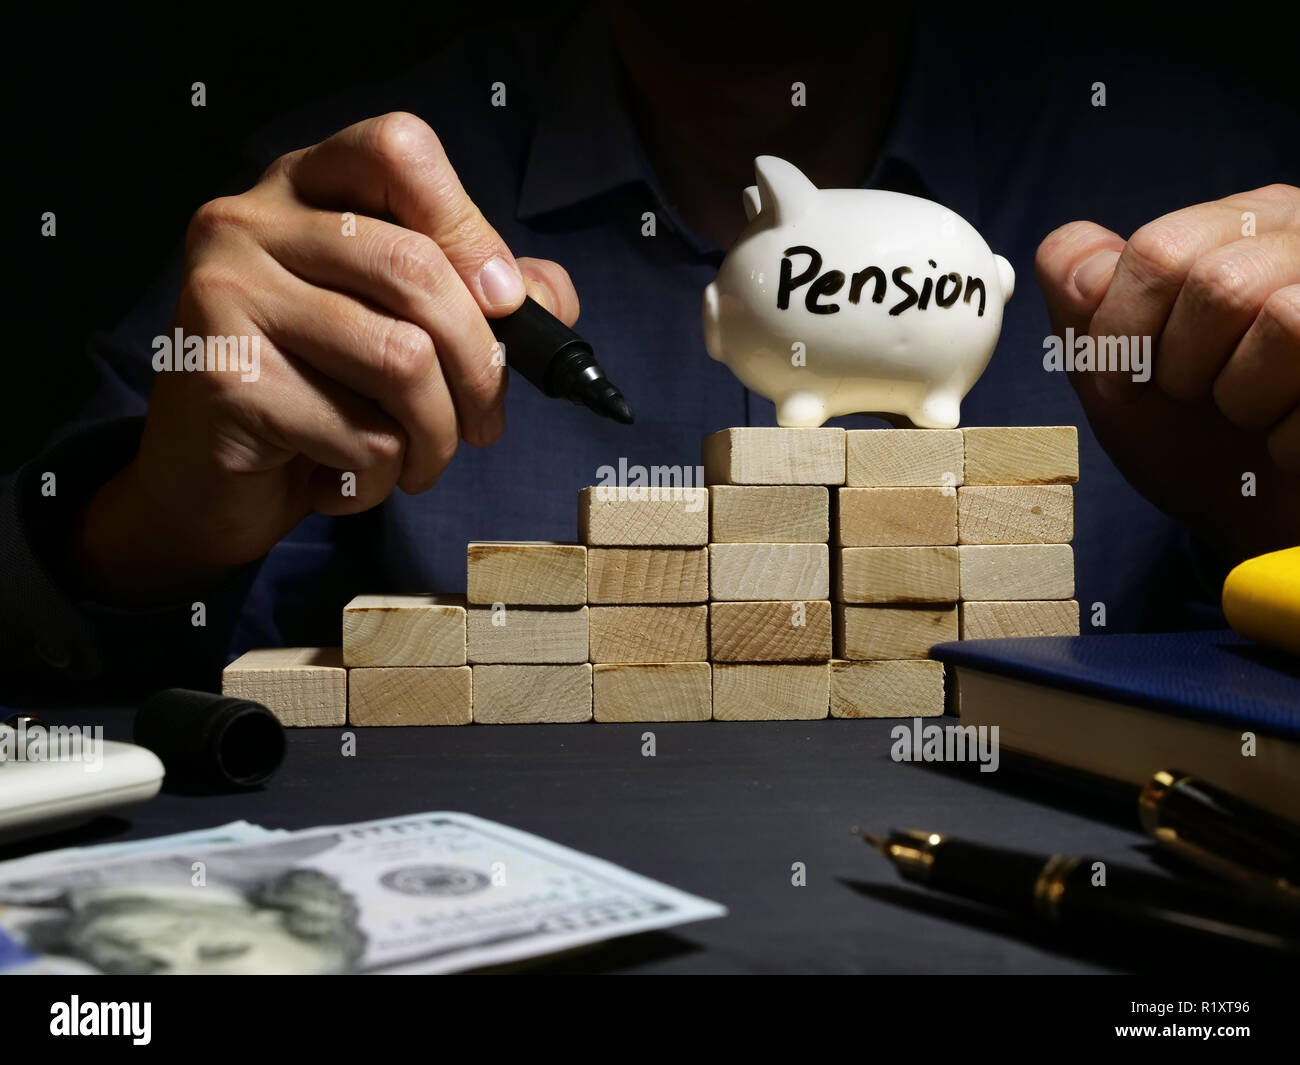 Retirement planning. Pension written on a piggy bank. Stock Photo